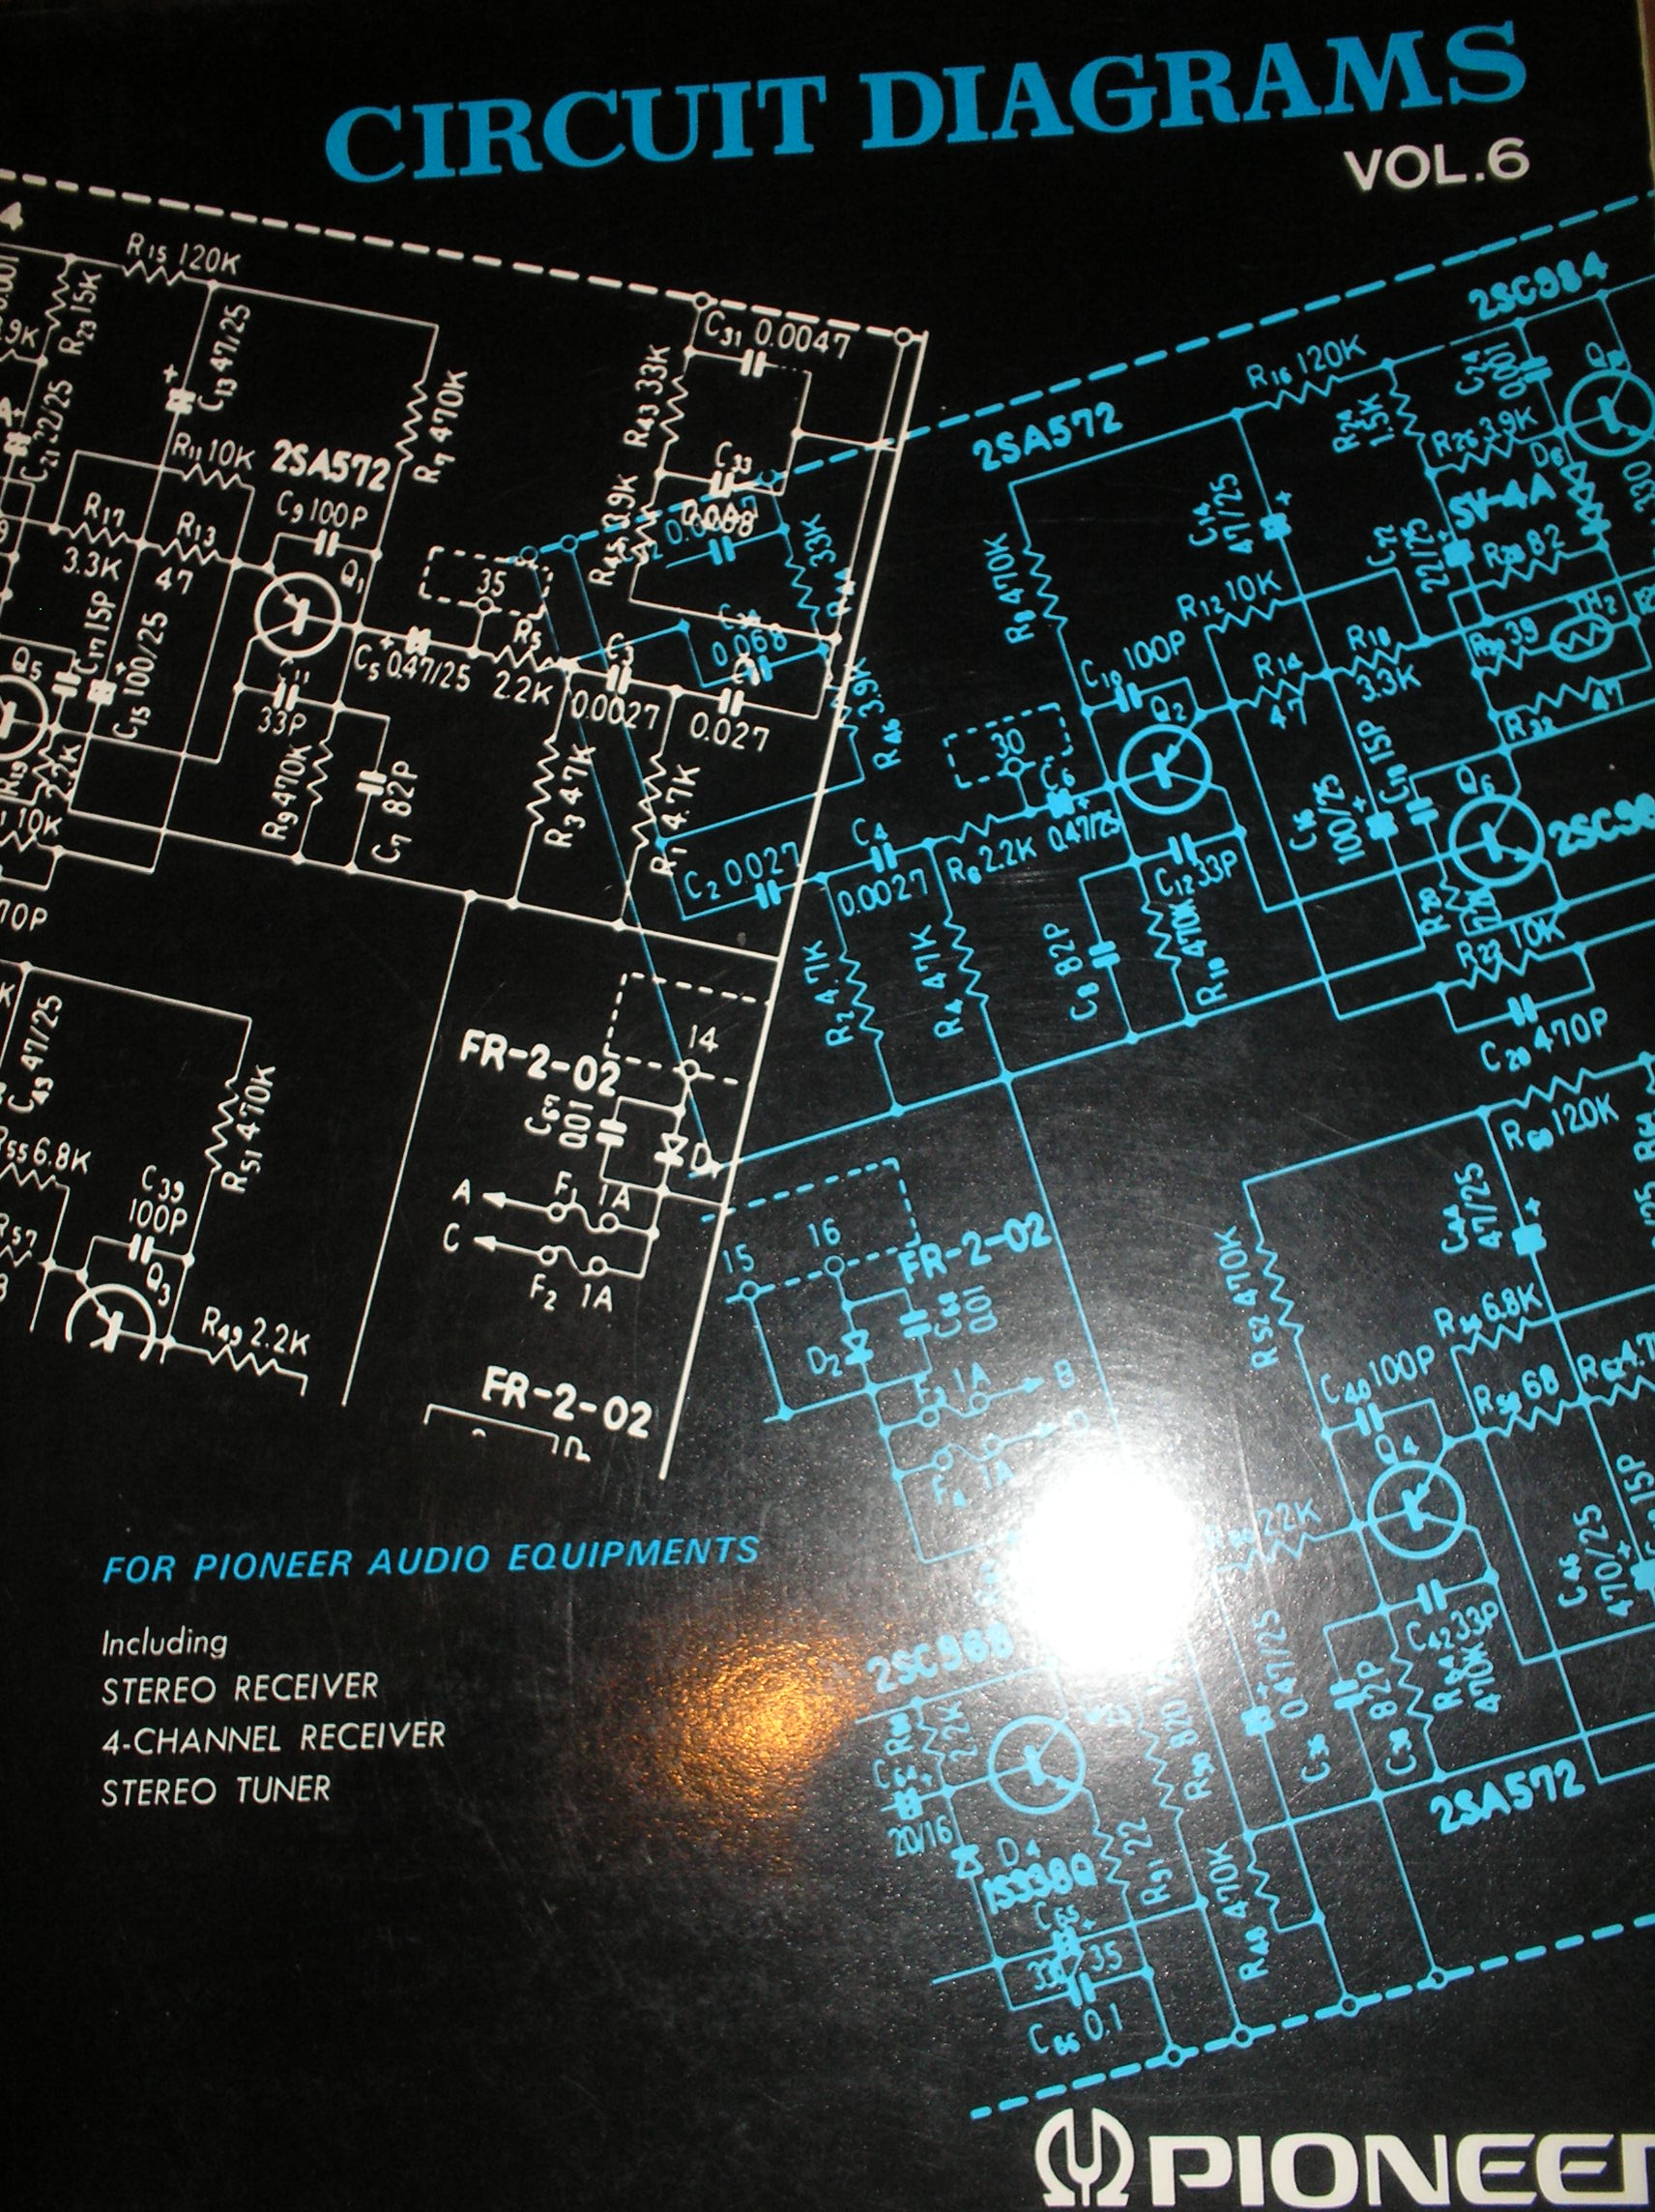 SX-939 Stereo Receiver fold out schematics.   Book 6